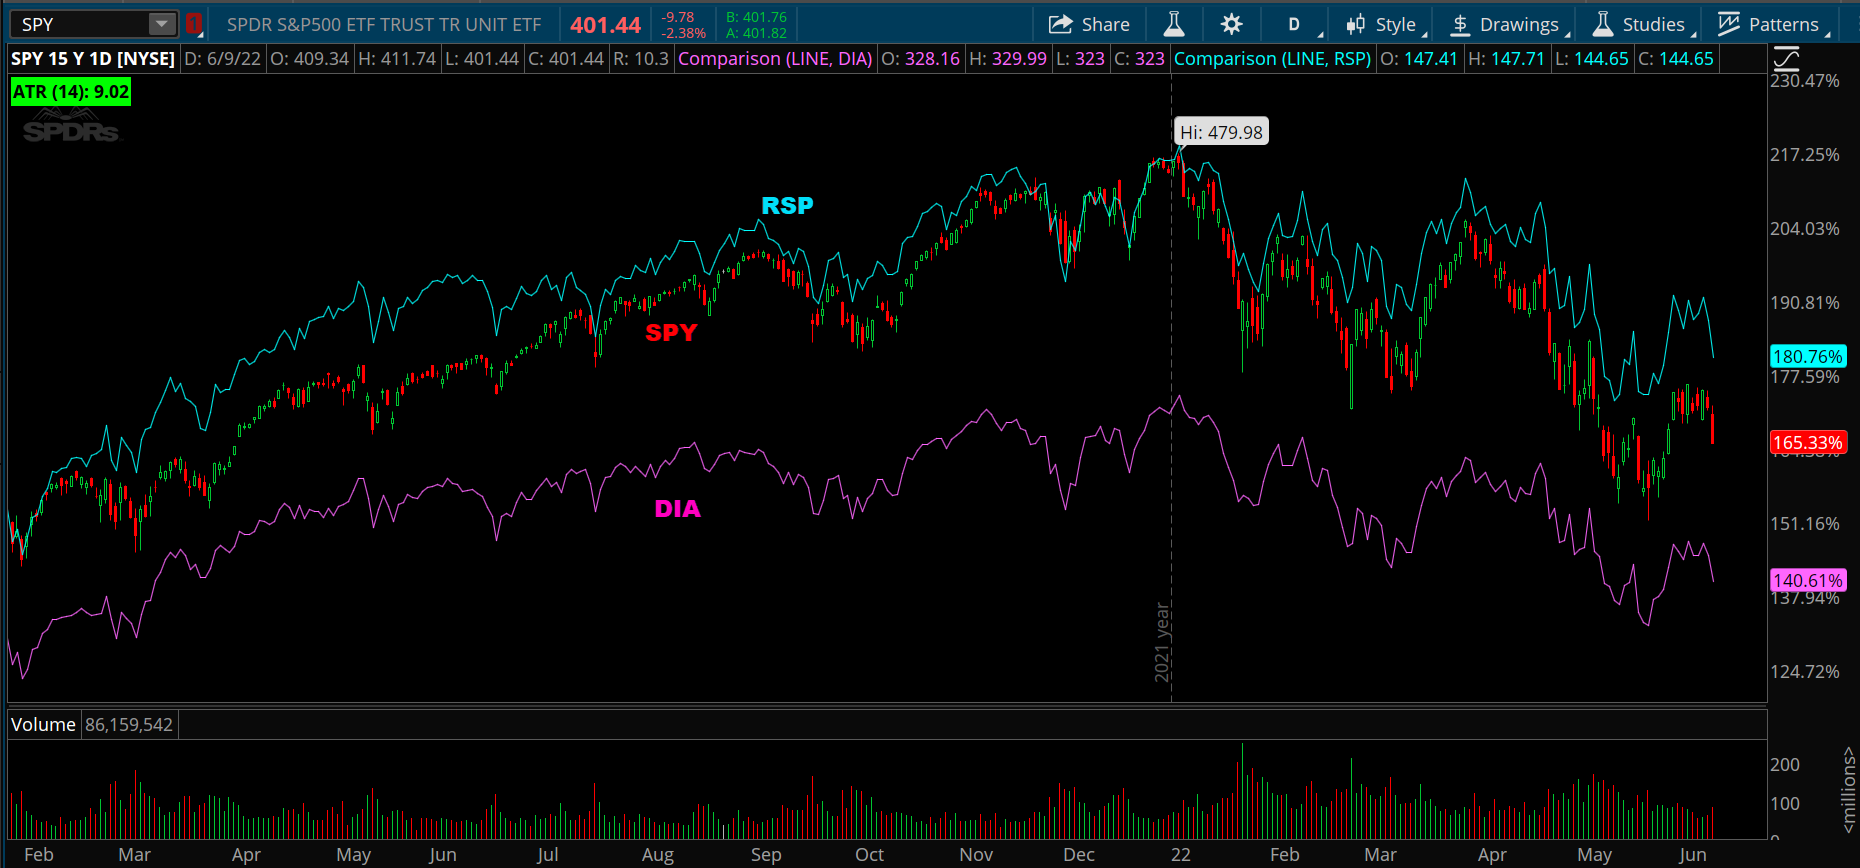 Chart of the Day: S&P 500 Index Comparison ($SPY)